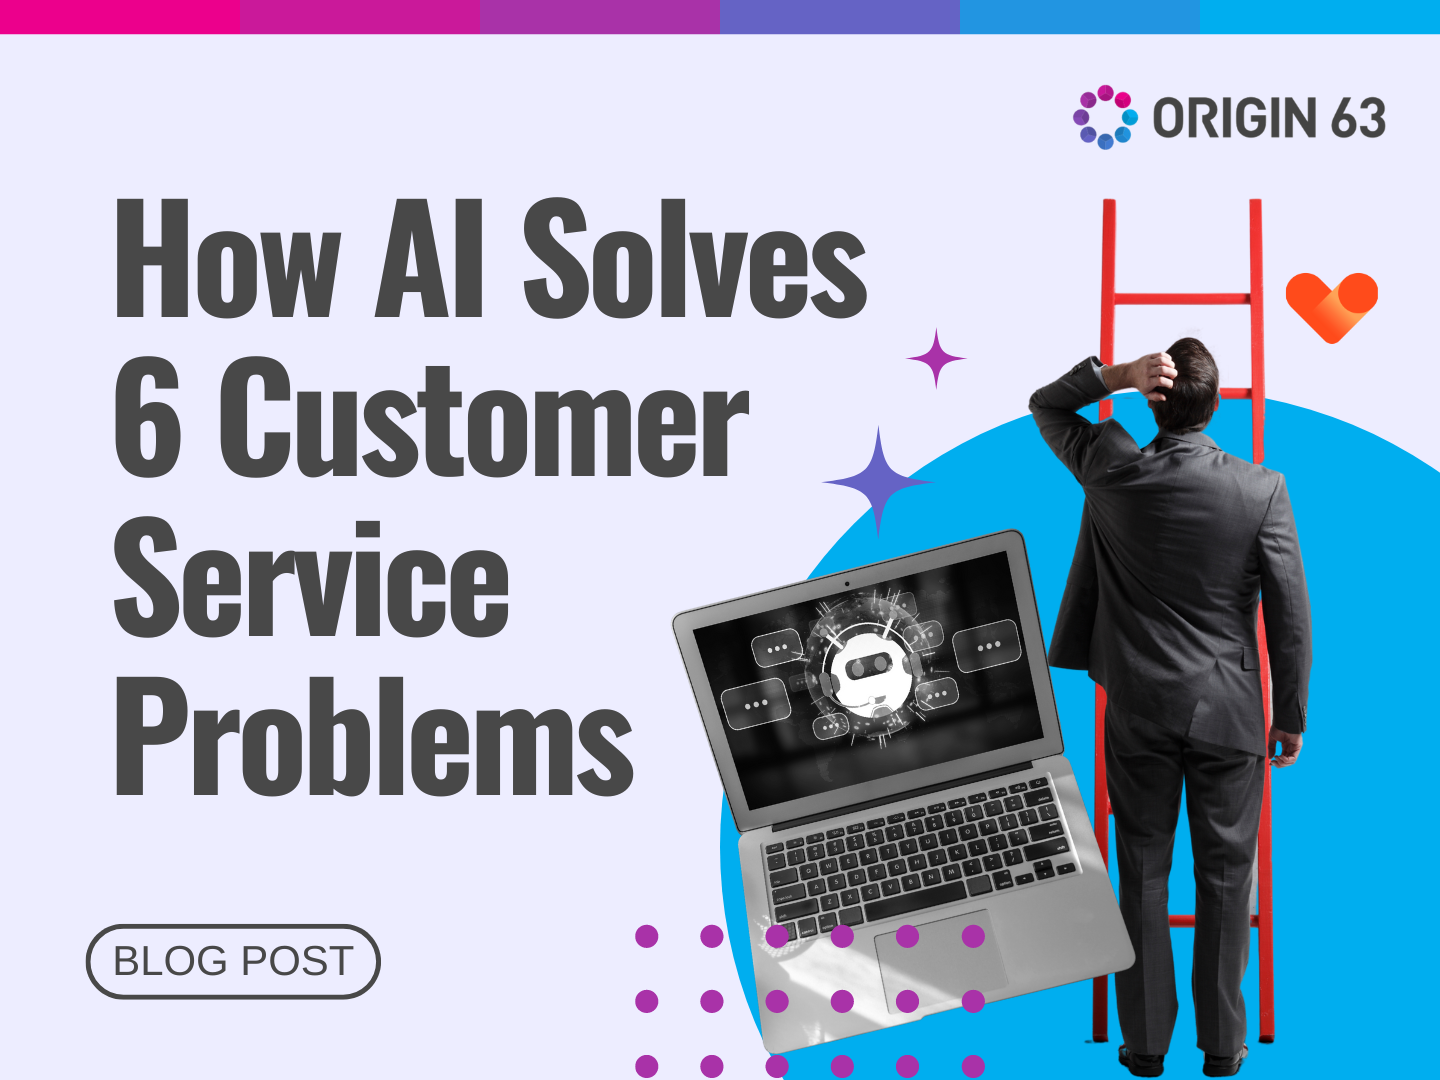 Learn how AI solves 6 common customer service problems and explore 3 powerful HubSpot AI tools to transform your support strategy.